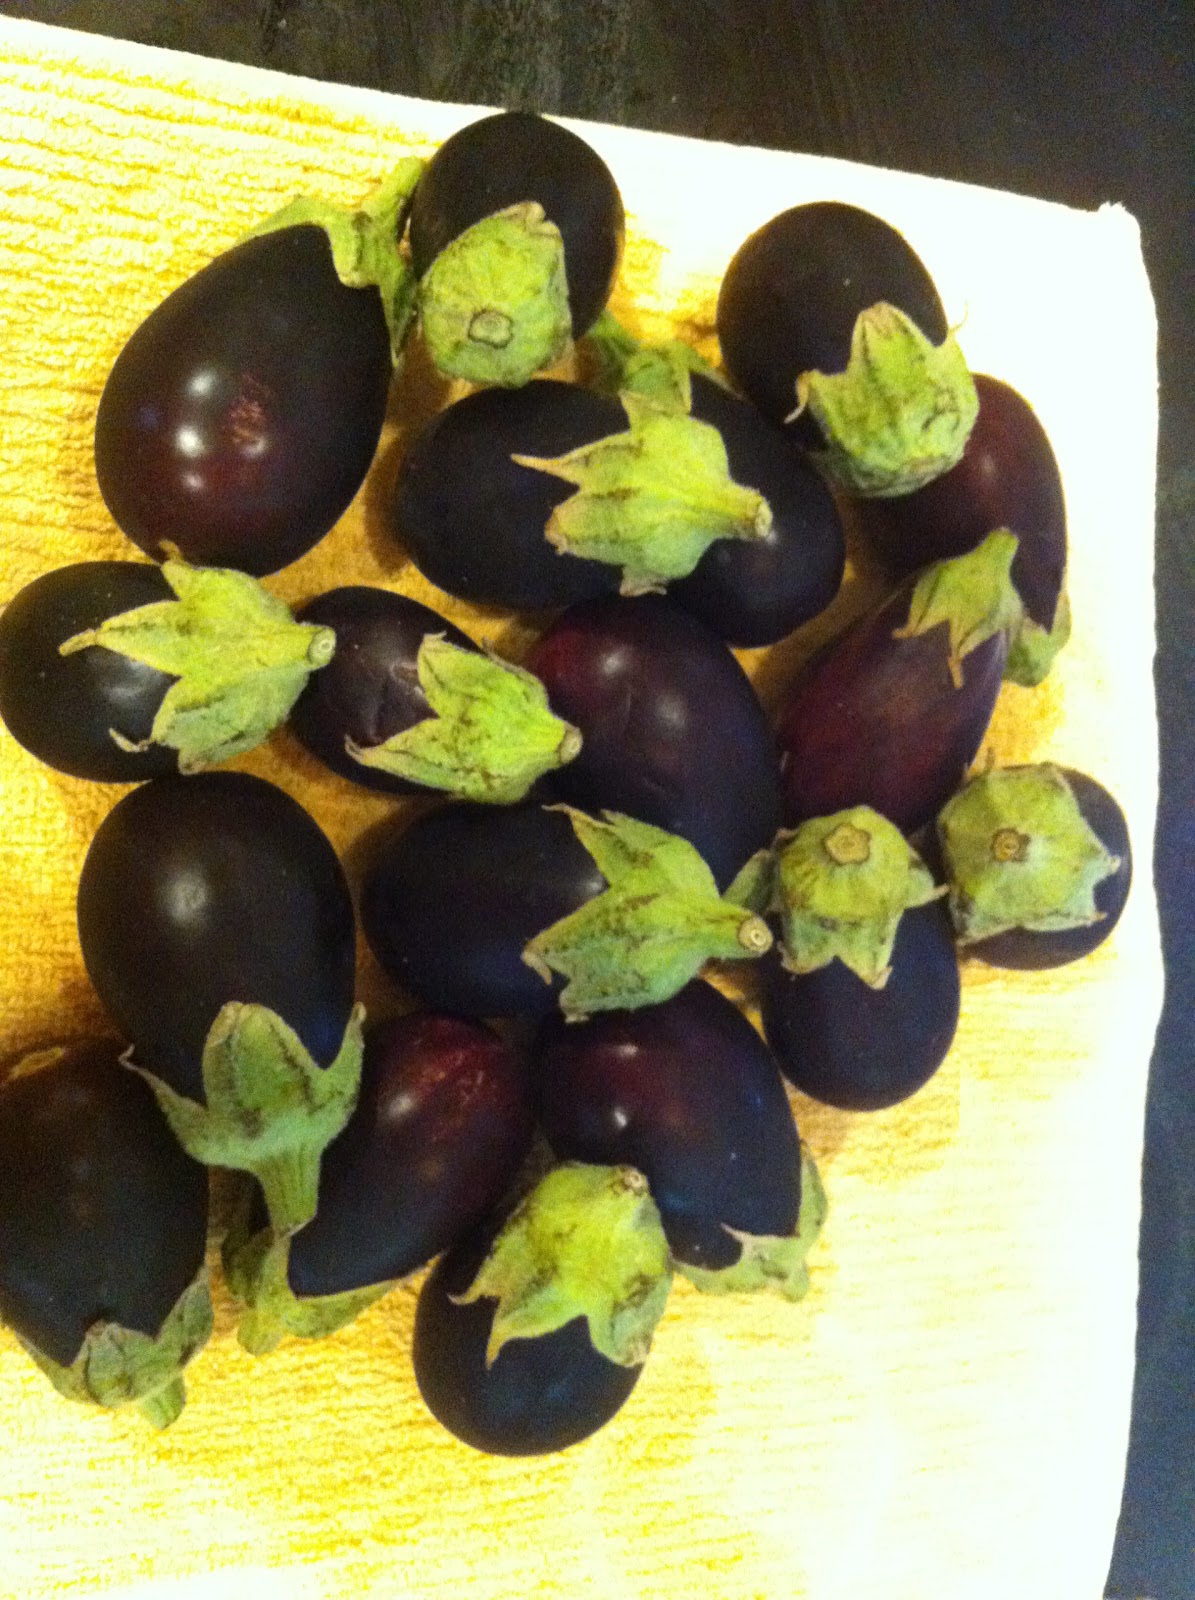 Preserving your health: Makdous - Preserved stuffed baby eggplant